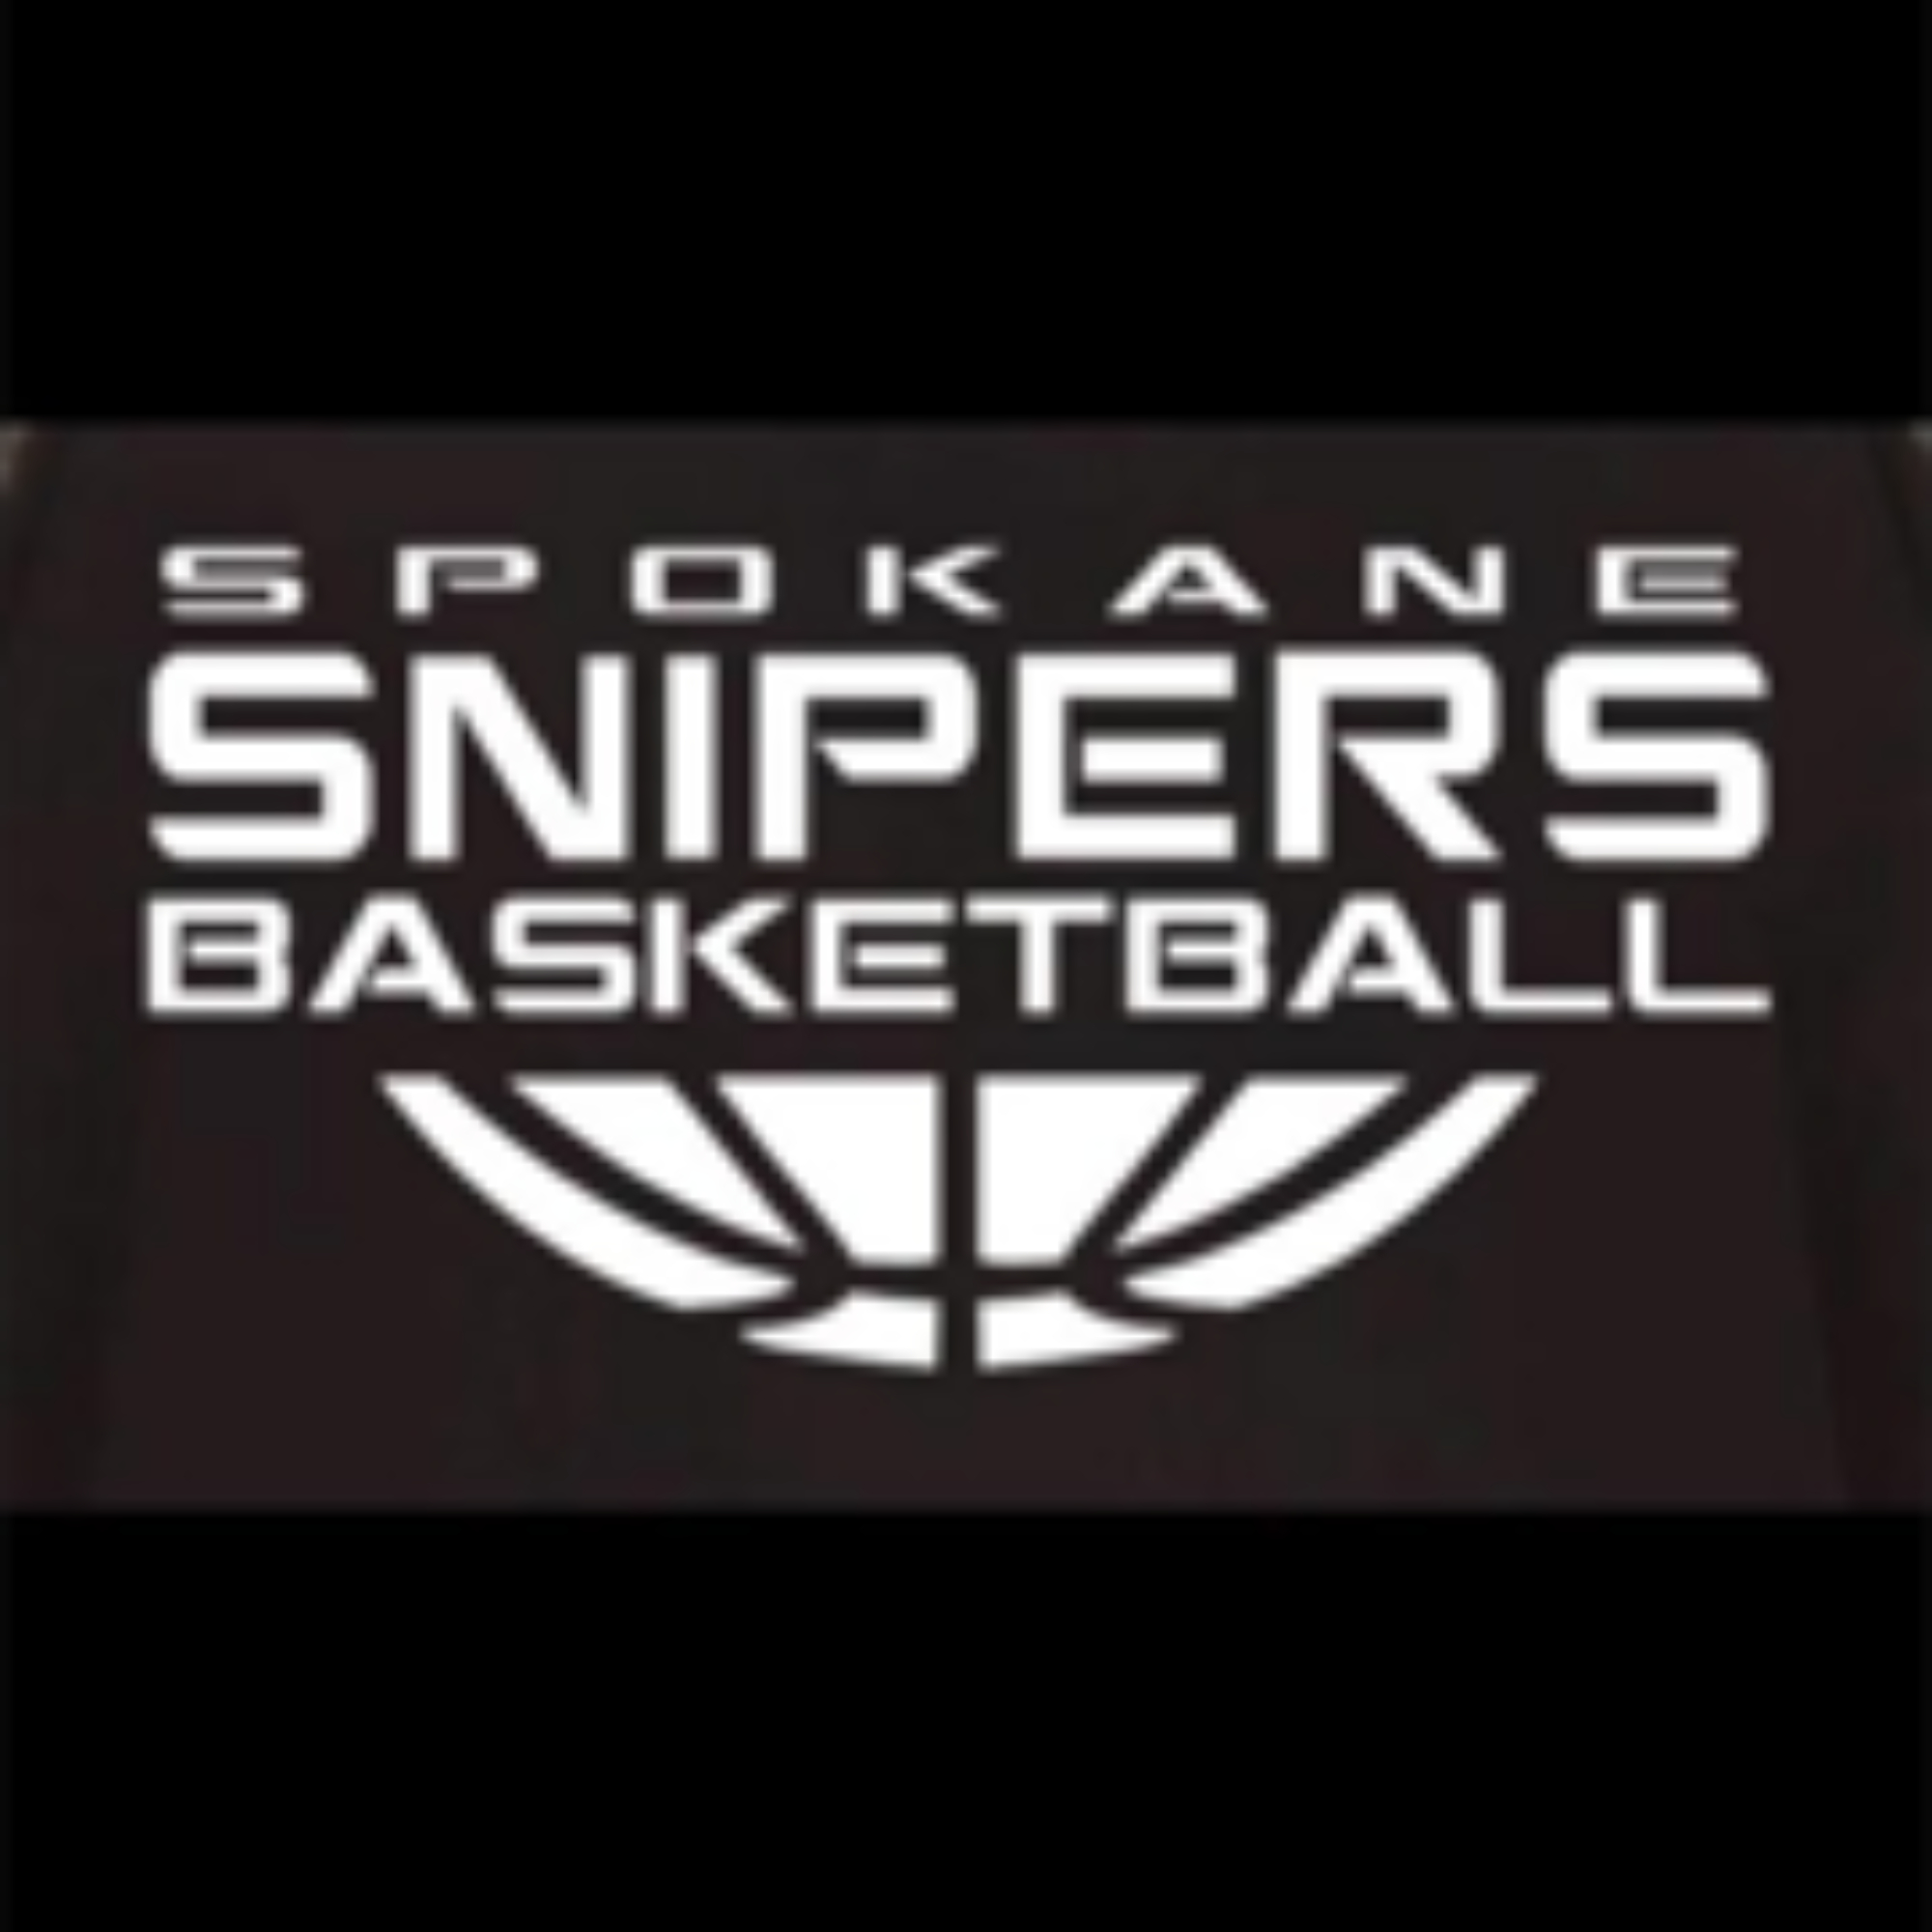 The official logo of Snipers Basketball Club